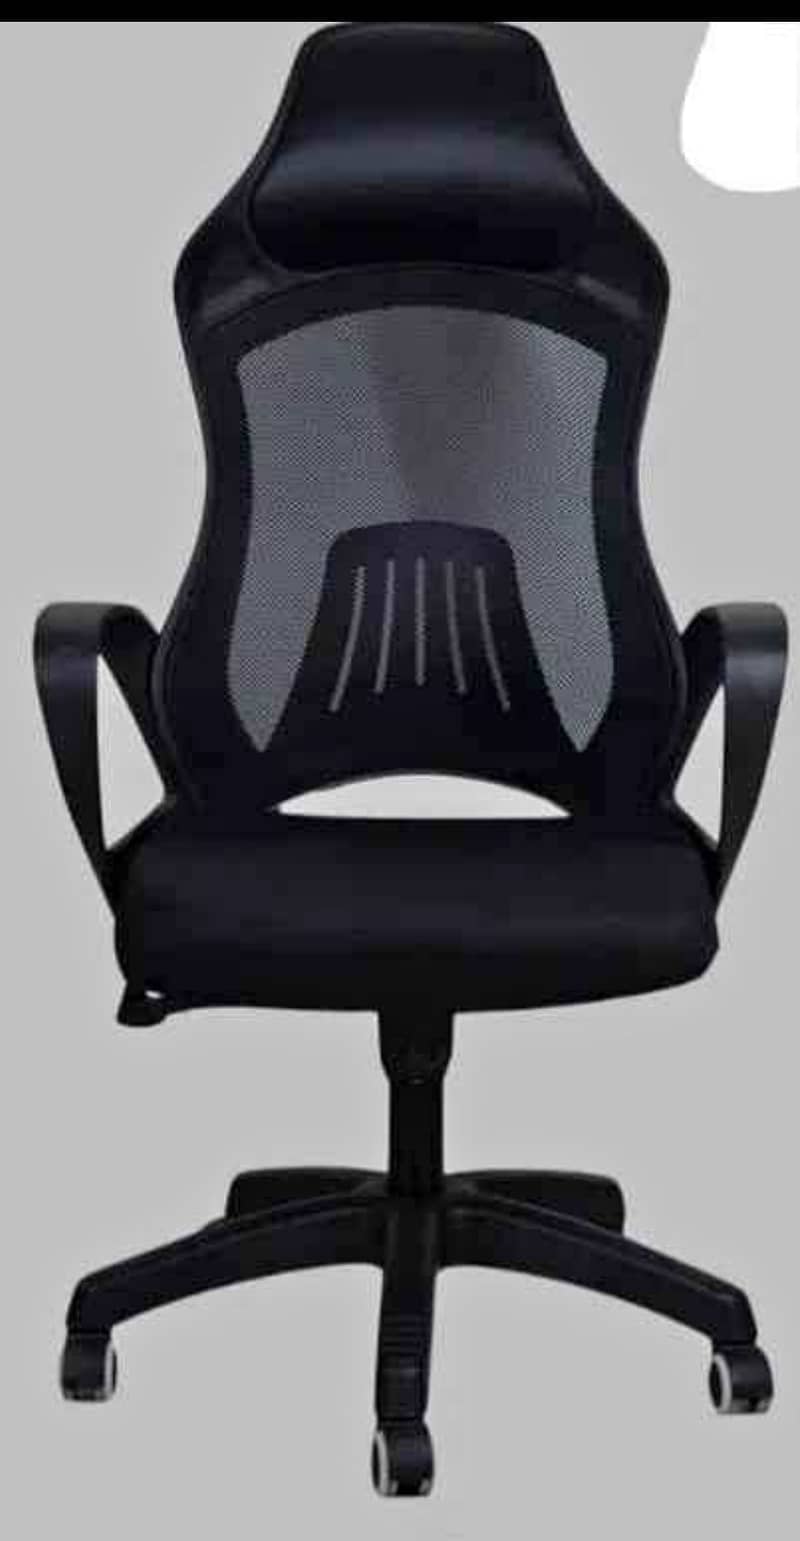 Executive / manager chairs boss chair, mesh chairs, headrest chair 2